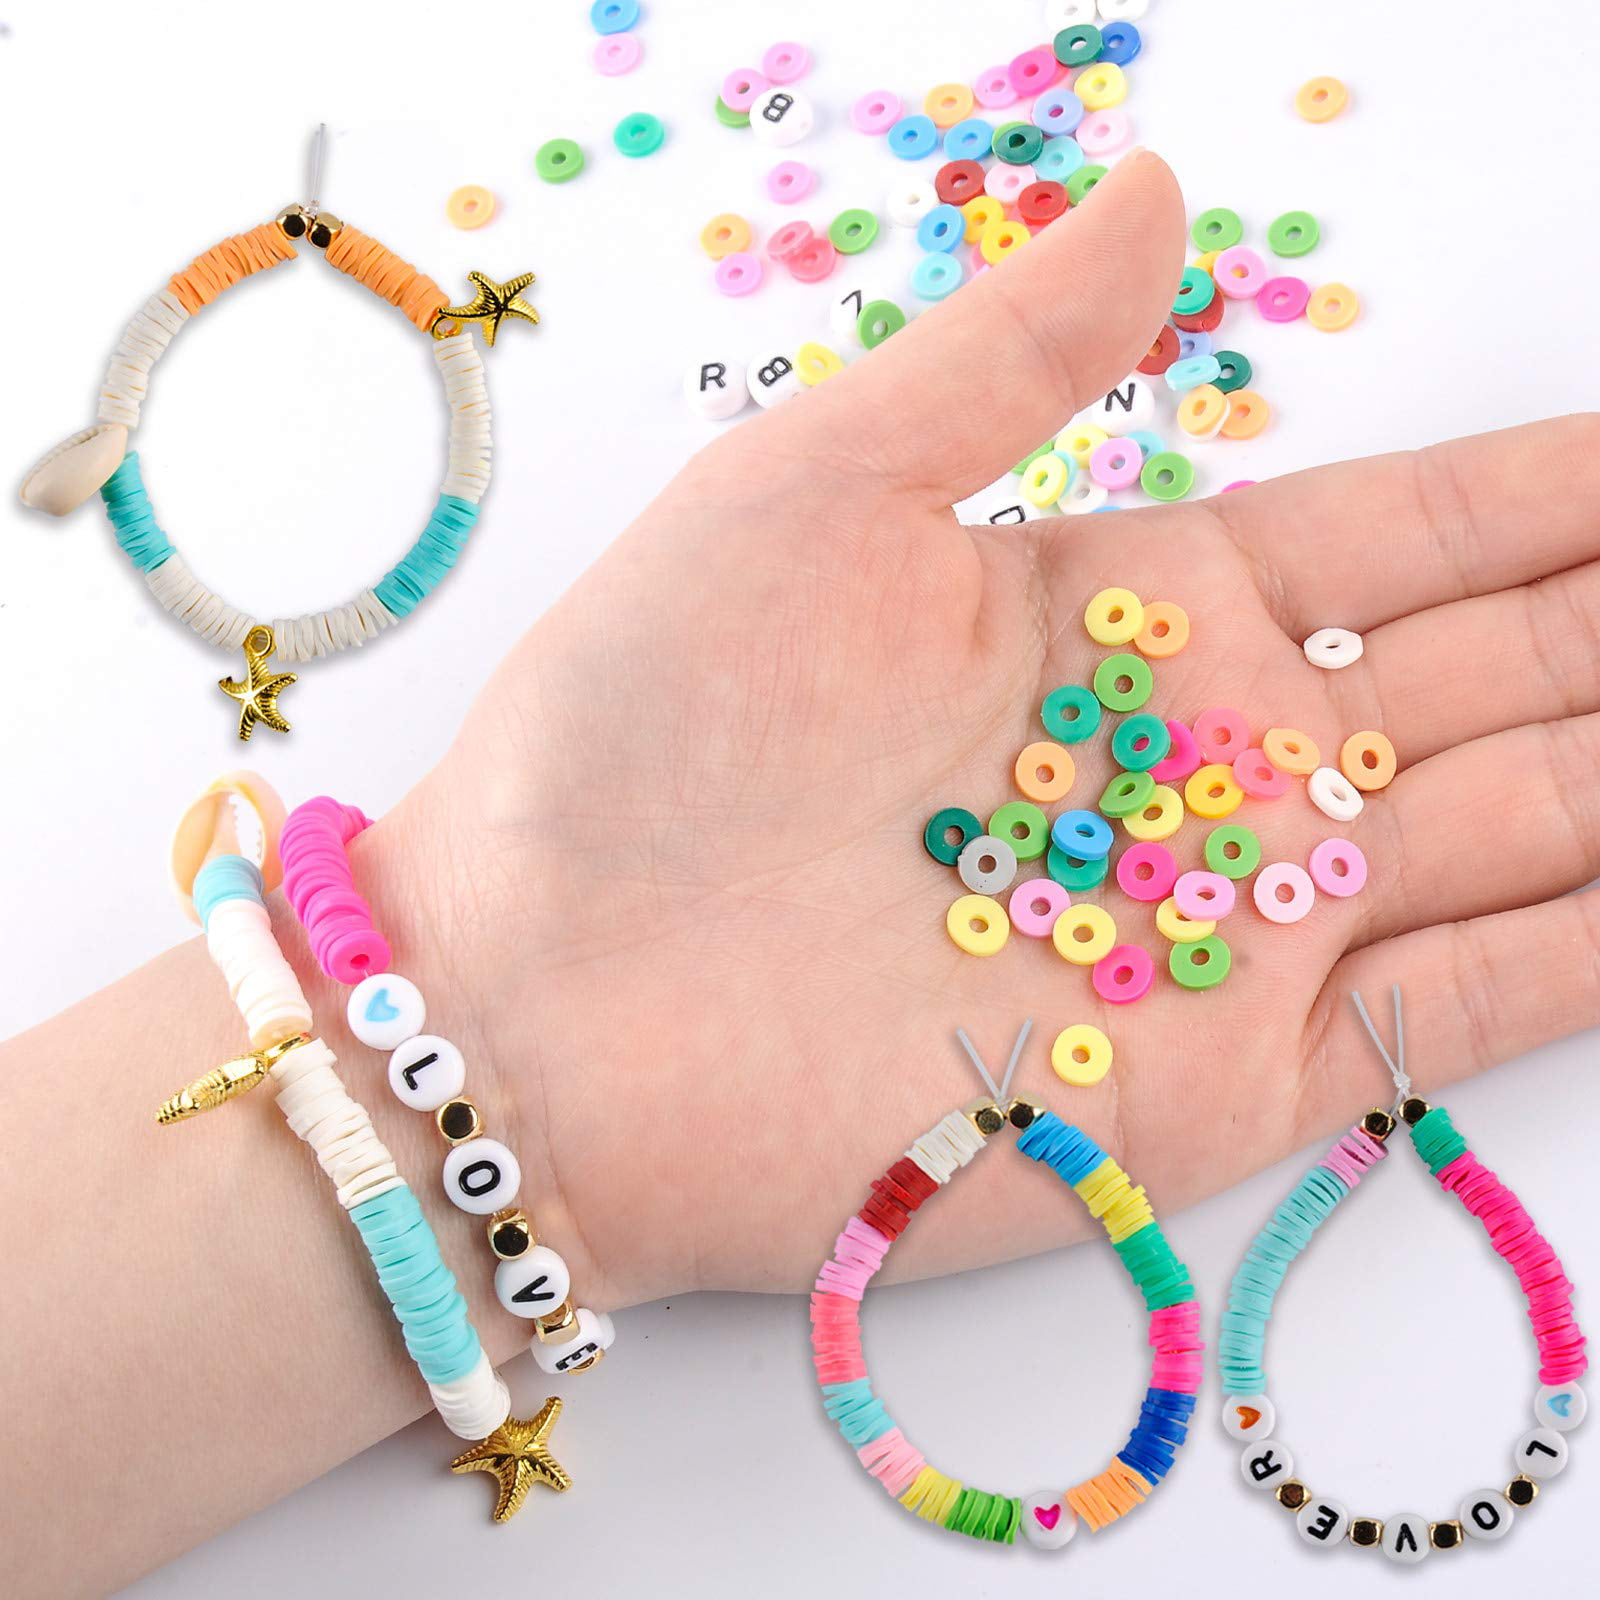 20/50/100pcs Cute Mixed Animal Beads Polymer Clay Beads Handmade Loose  Spacer Beads for Jewelry Making DIY Bracelet Accessories - AliExpress